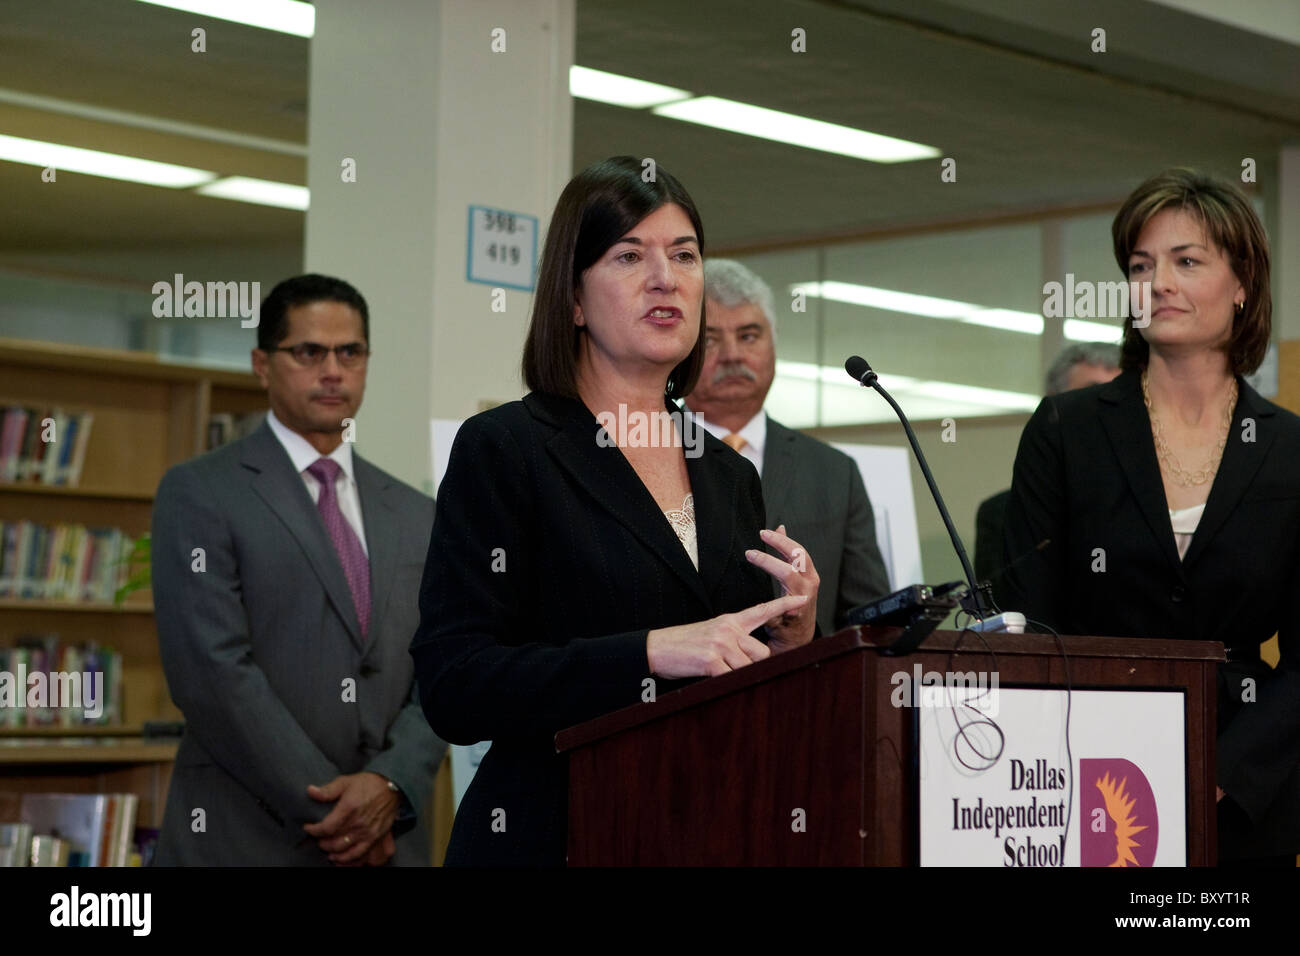 Female executive counts off talking points on her fingers at press conference at public school library in Dallas, Texas Stock Photo